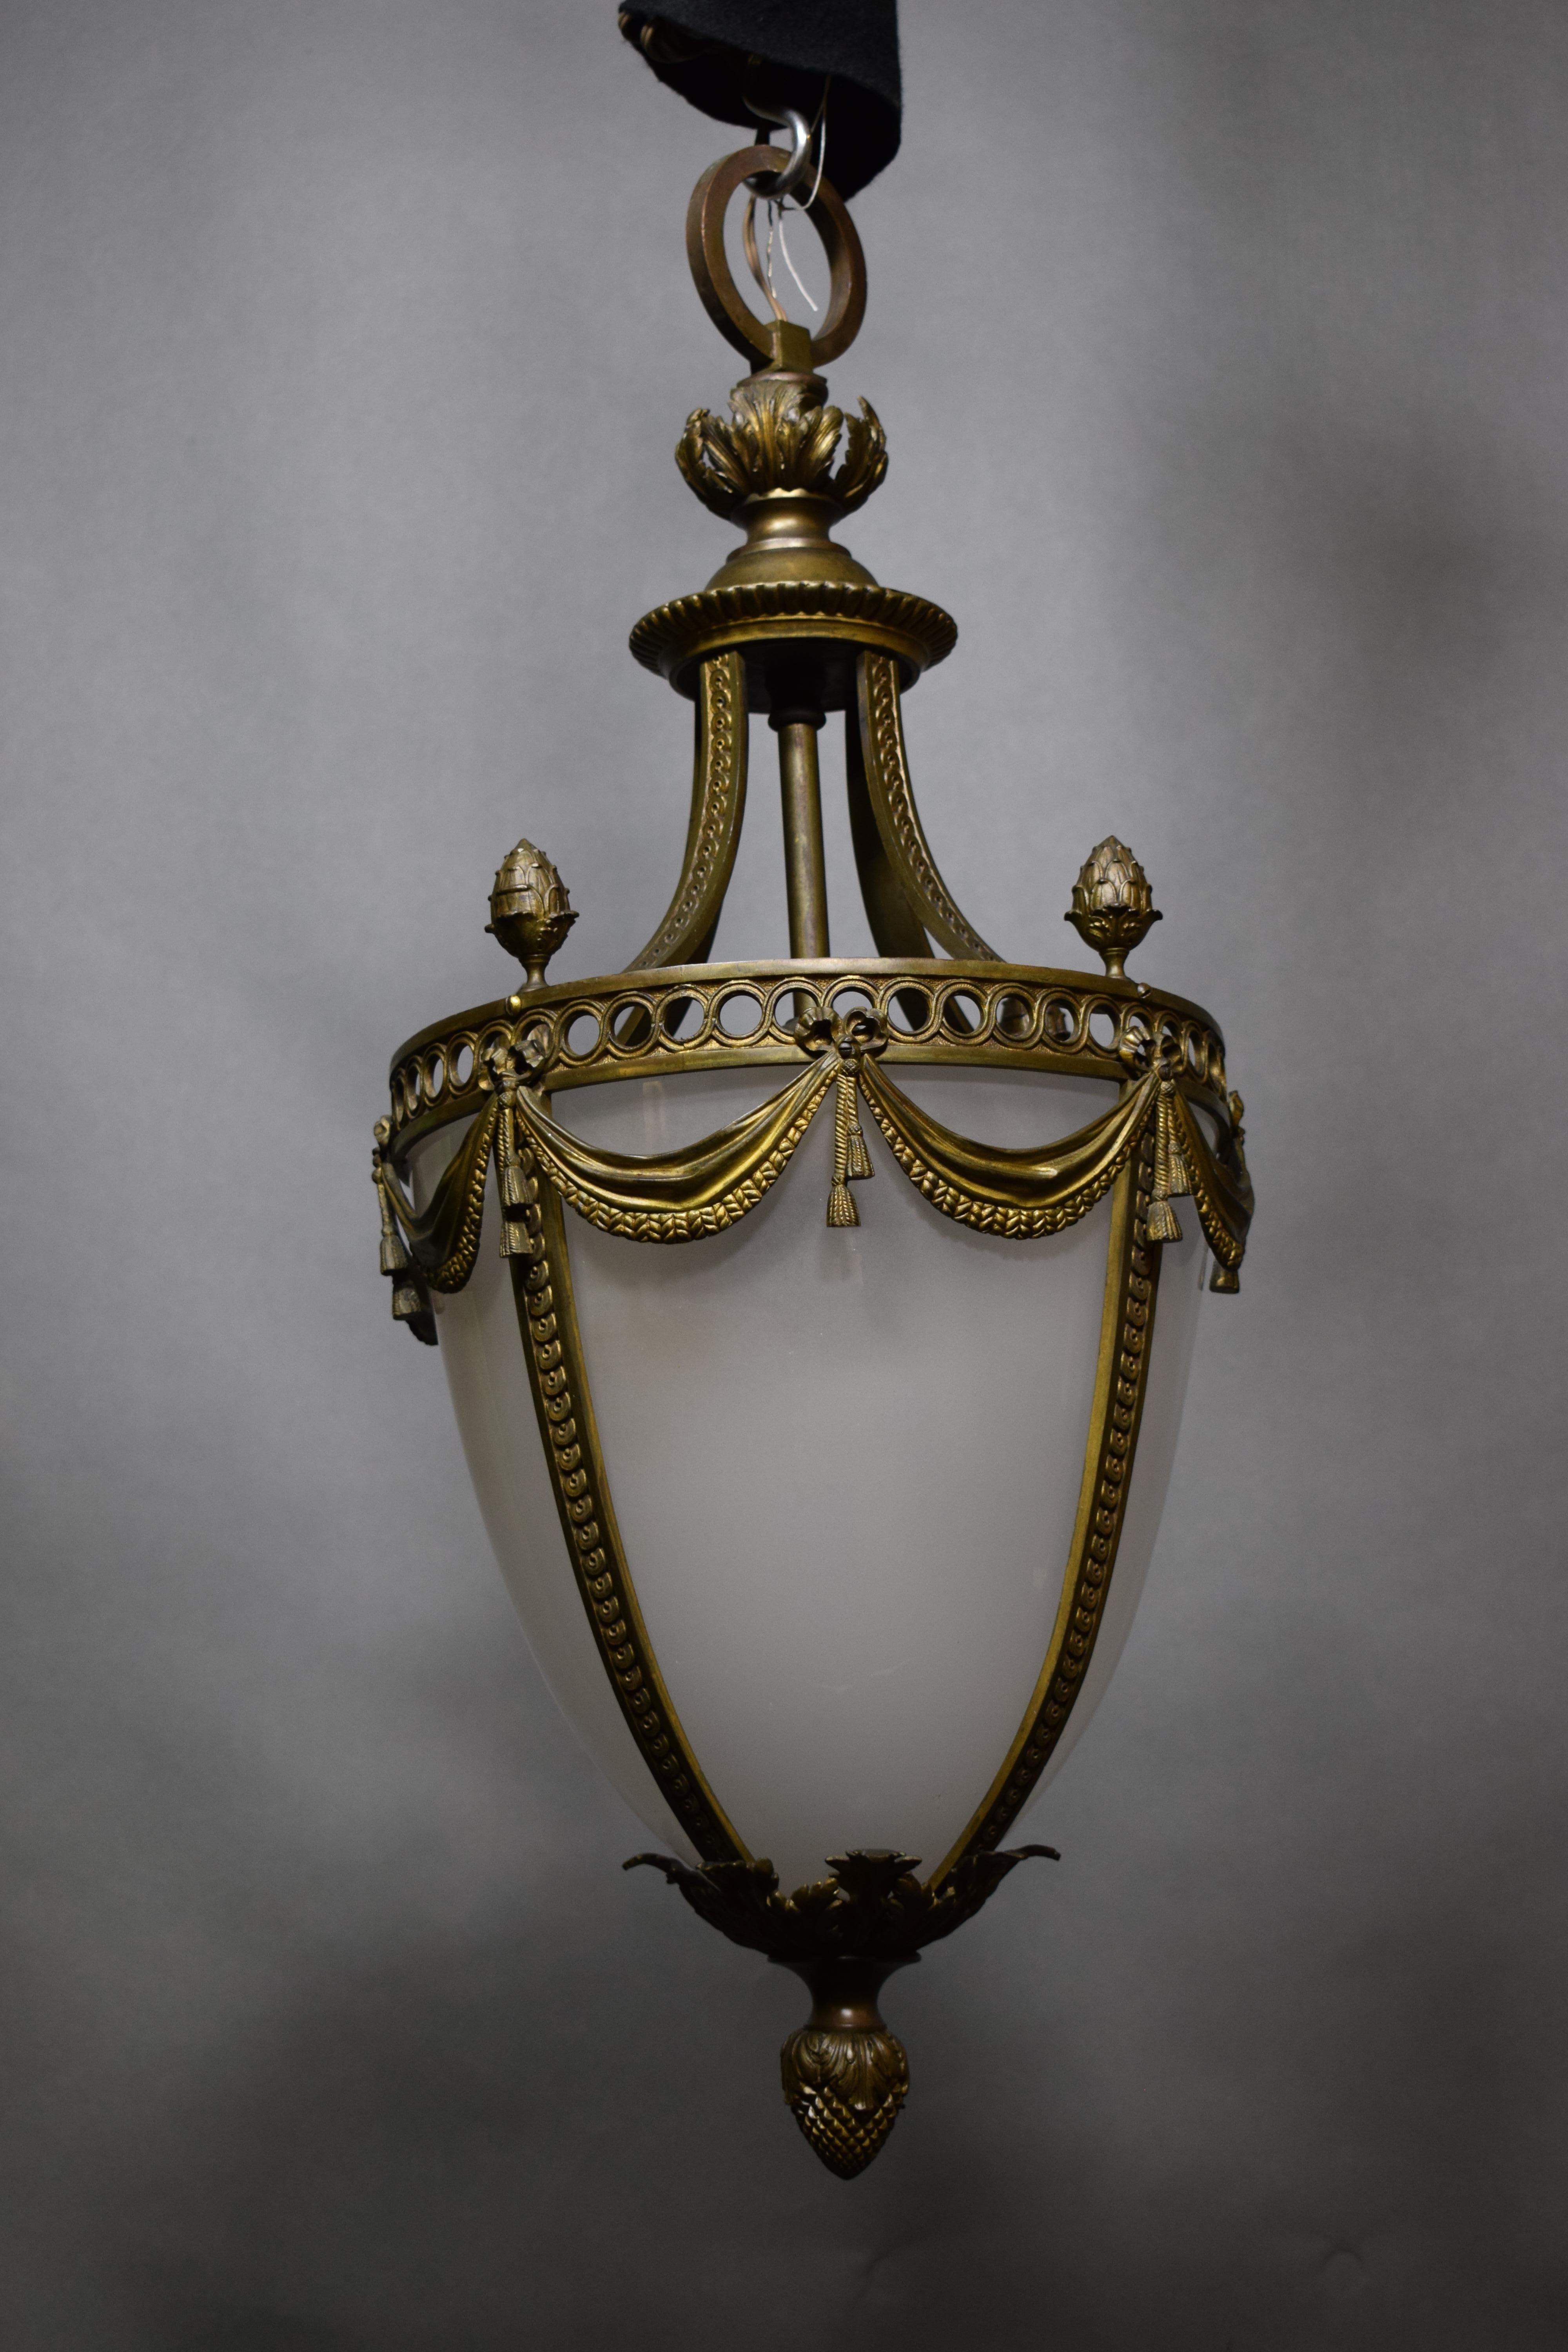 Early 20th Century French Gilt Bronze Louis XVI Style Hall Lantern For Sale